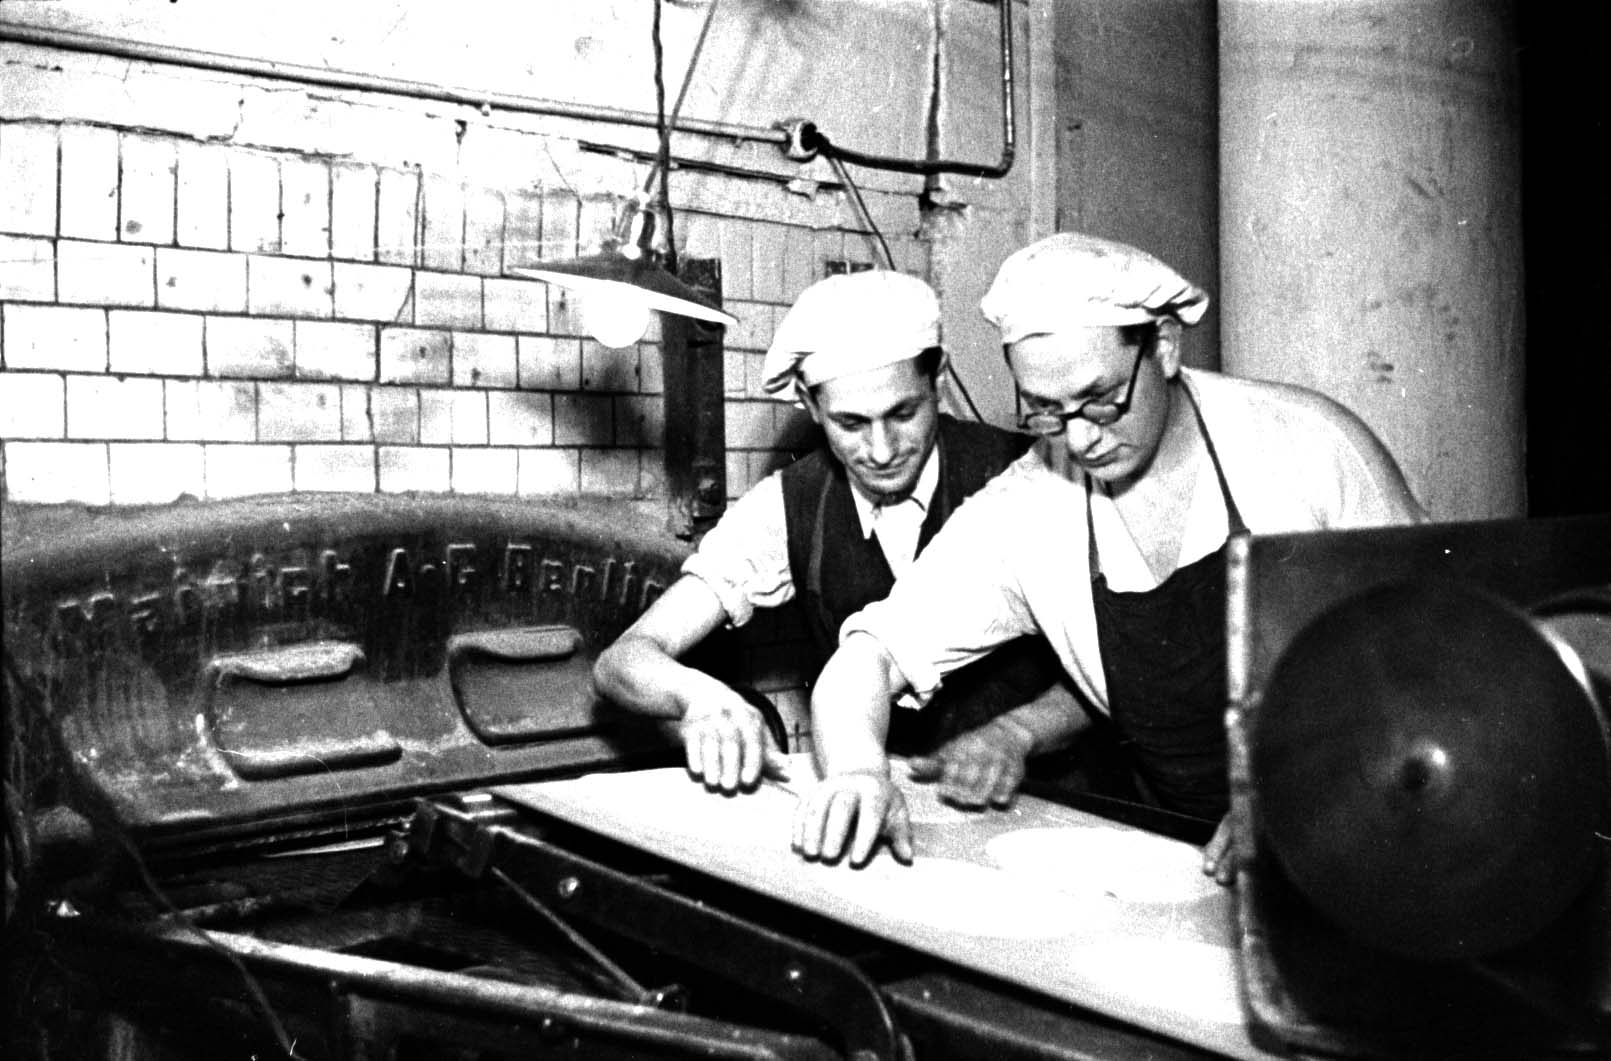 Dough being carried to the oven by conveyor belt at the Herzog matzah factory, Berlin, Germany, 1936.